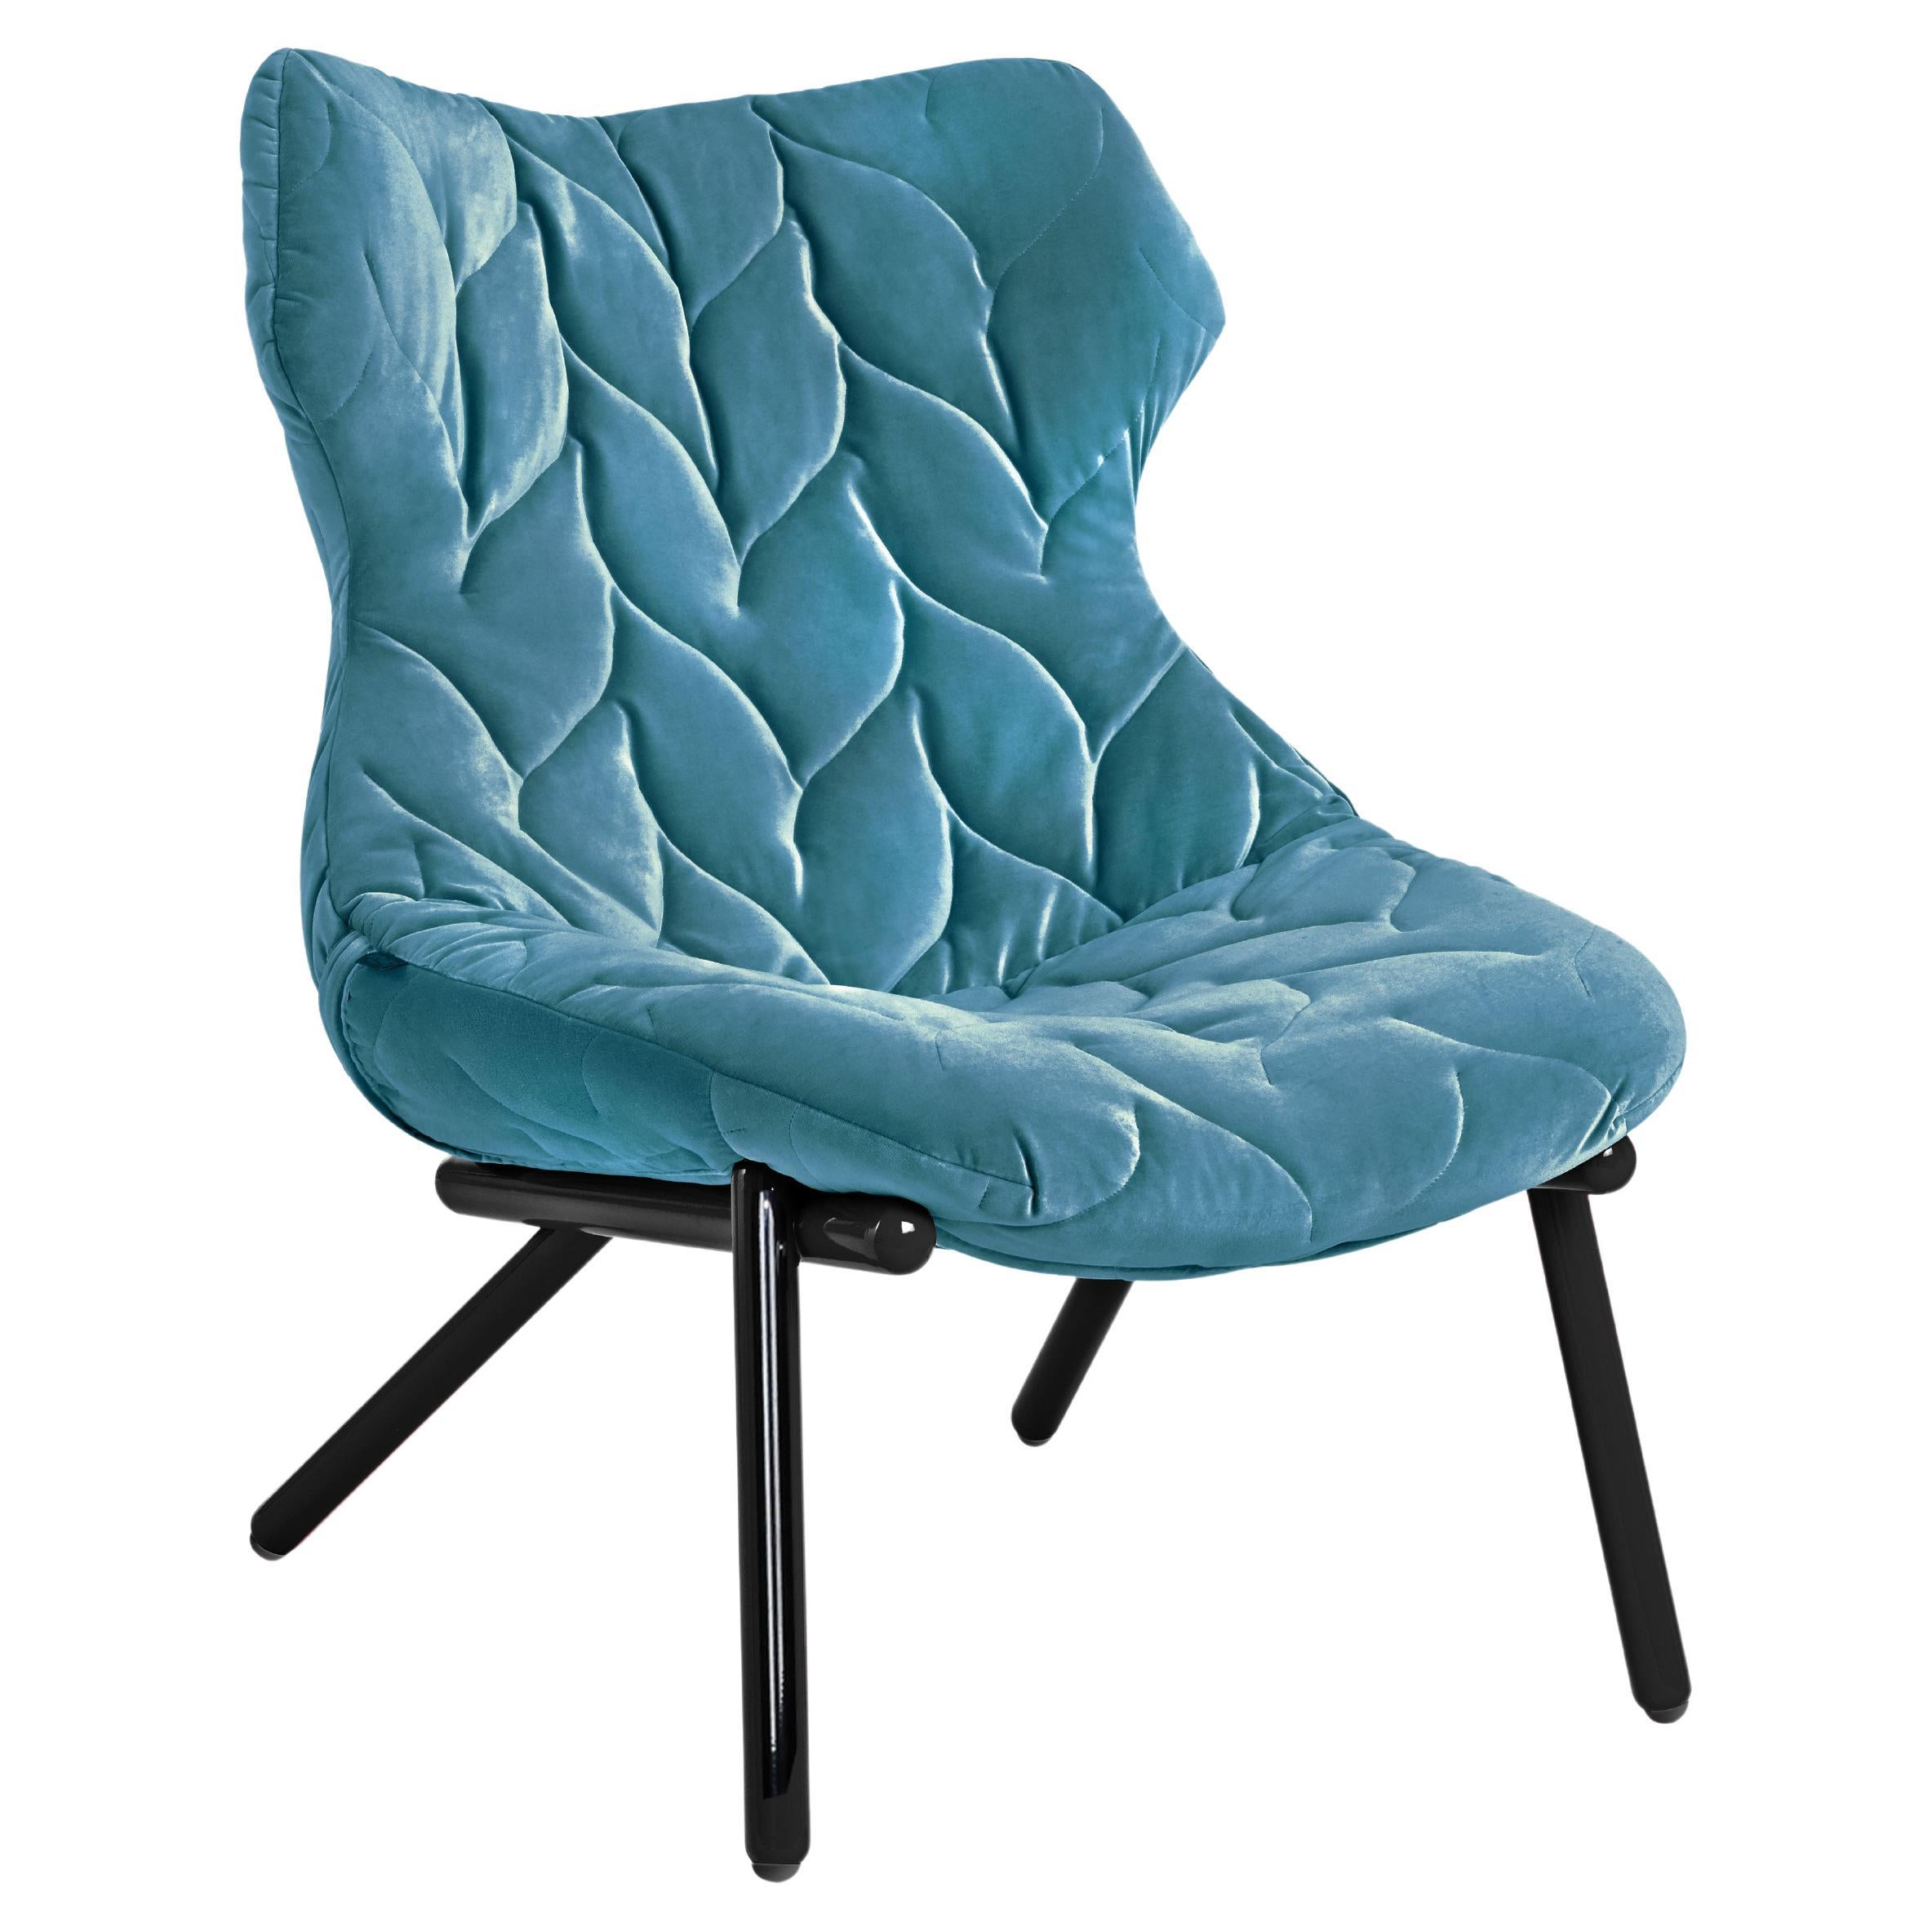 Kartell Foliage Armchair in Teal by Patricia Urquiola